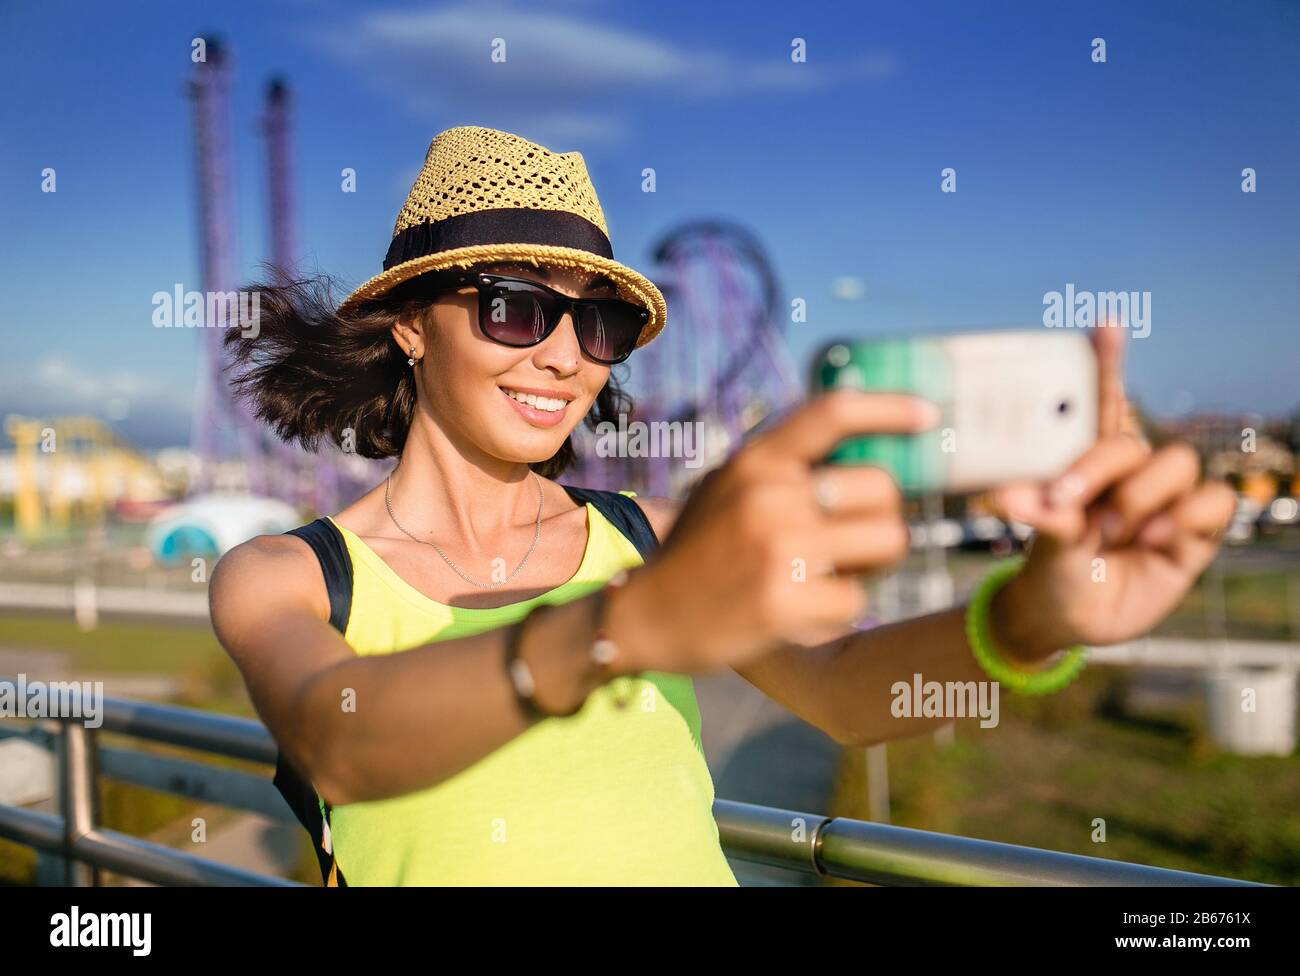 Woman using smartphone to take selfie photo in amusement park at roller  coaster background Stock Photo - Alamy